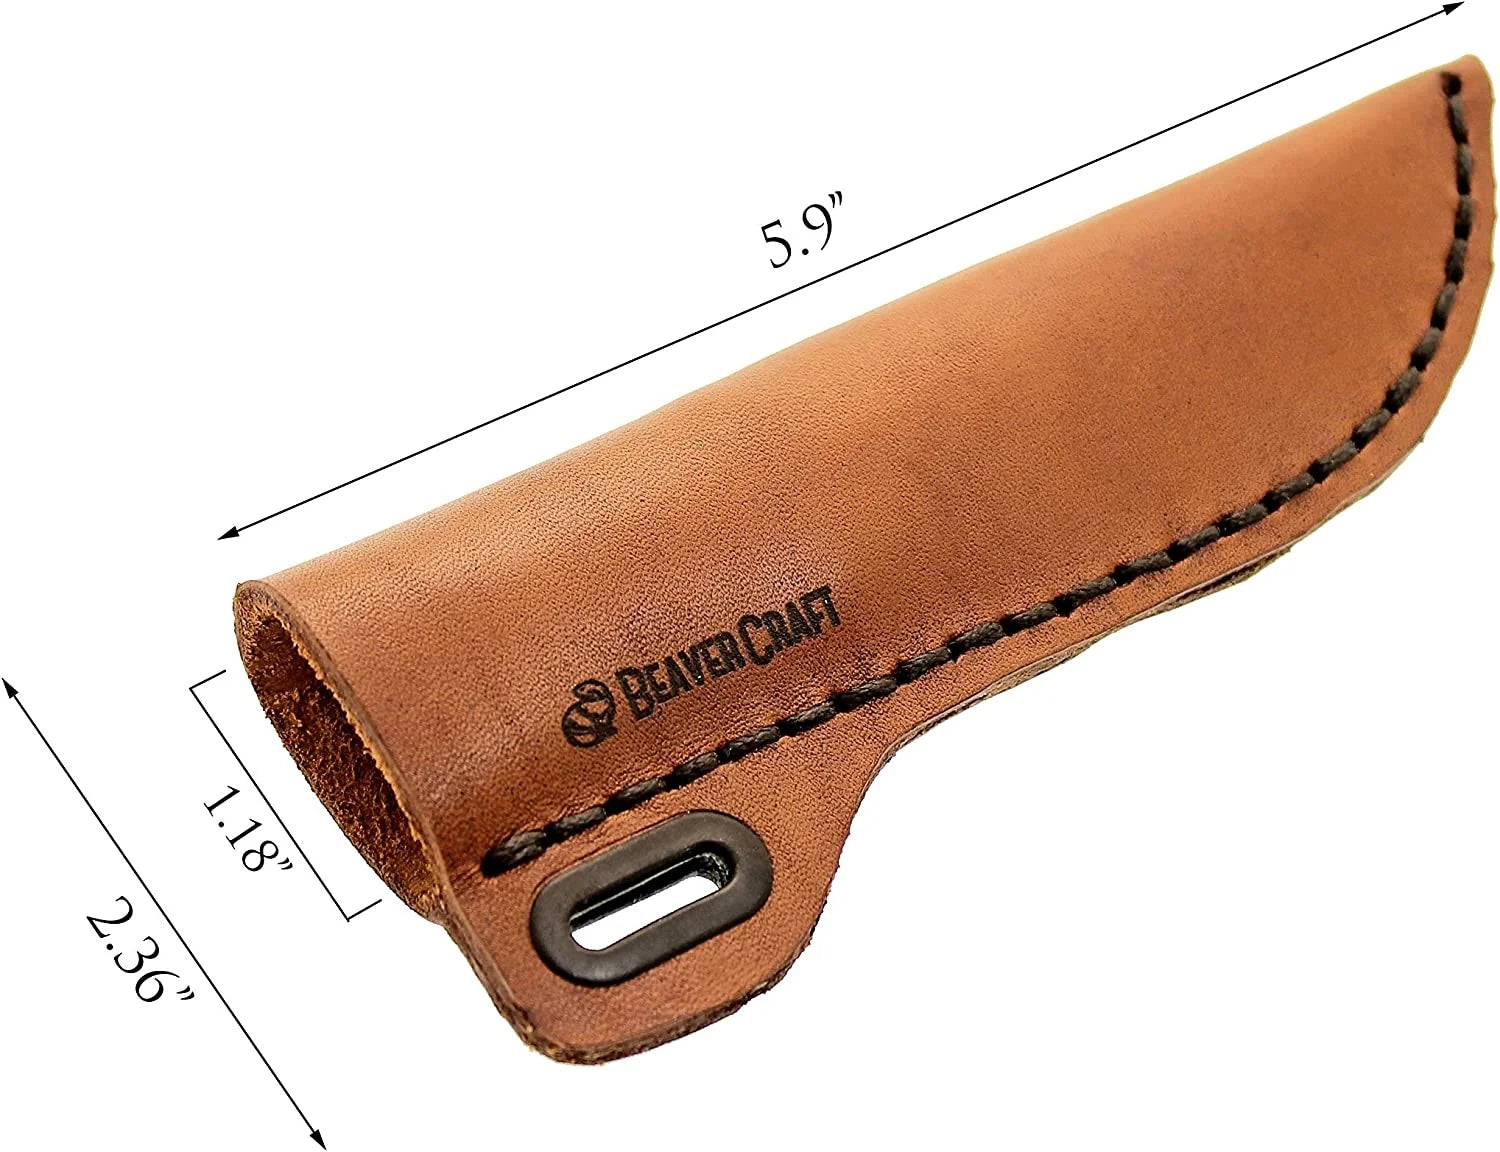 Buy leather sheath online for carving knife - leather knife case –  BeaverCraft Tools